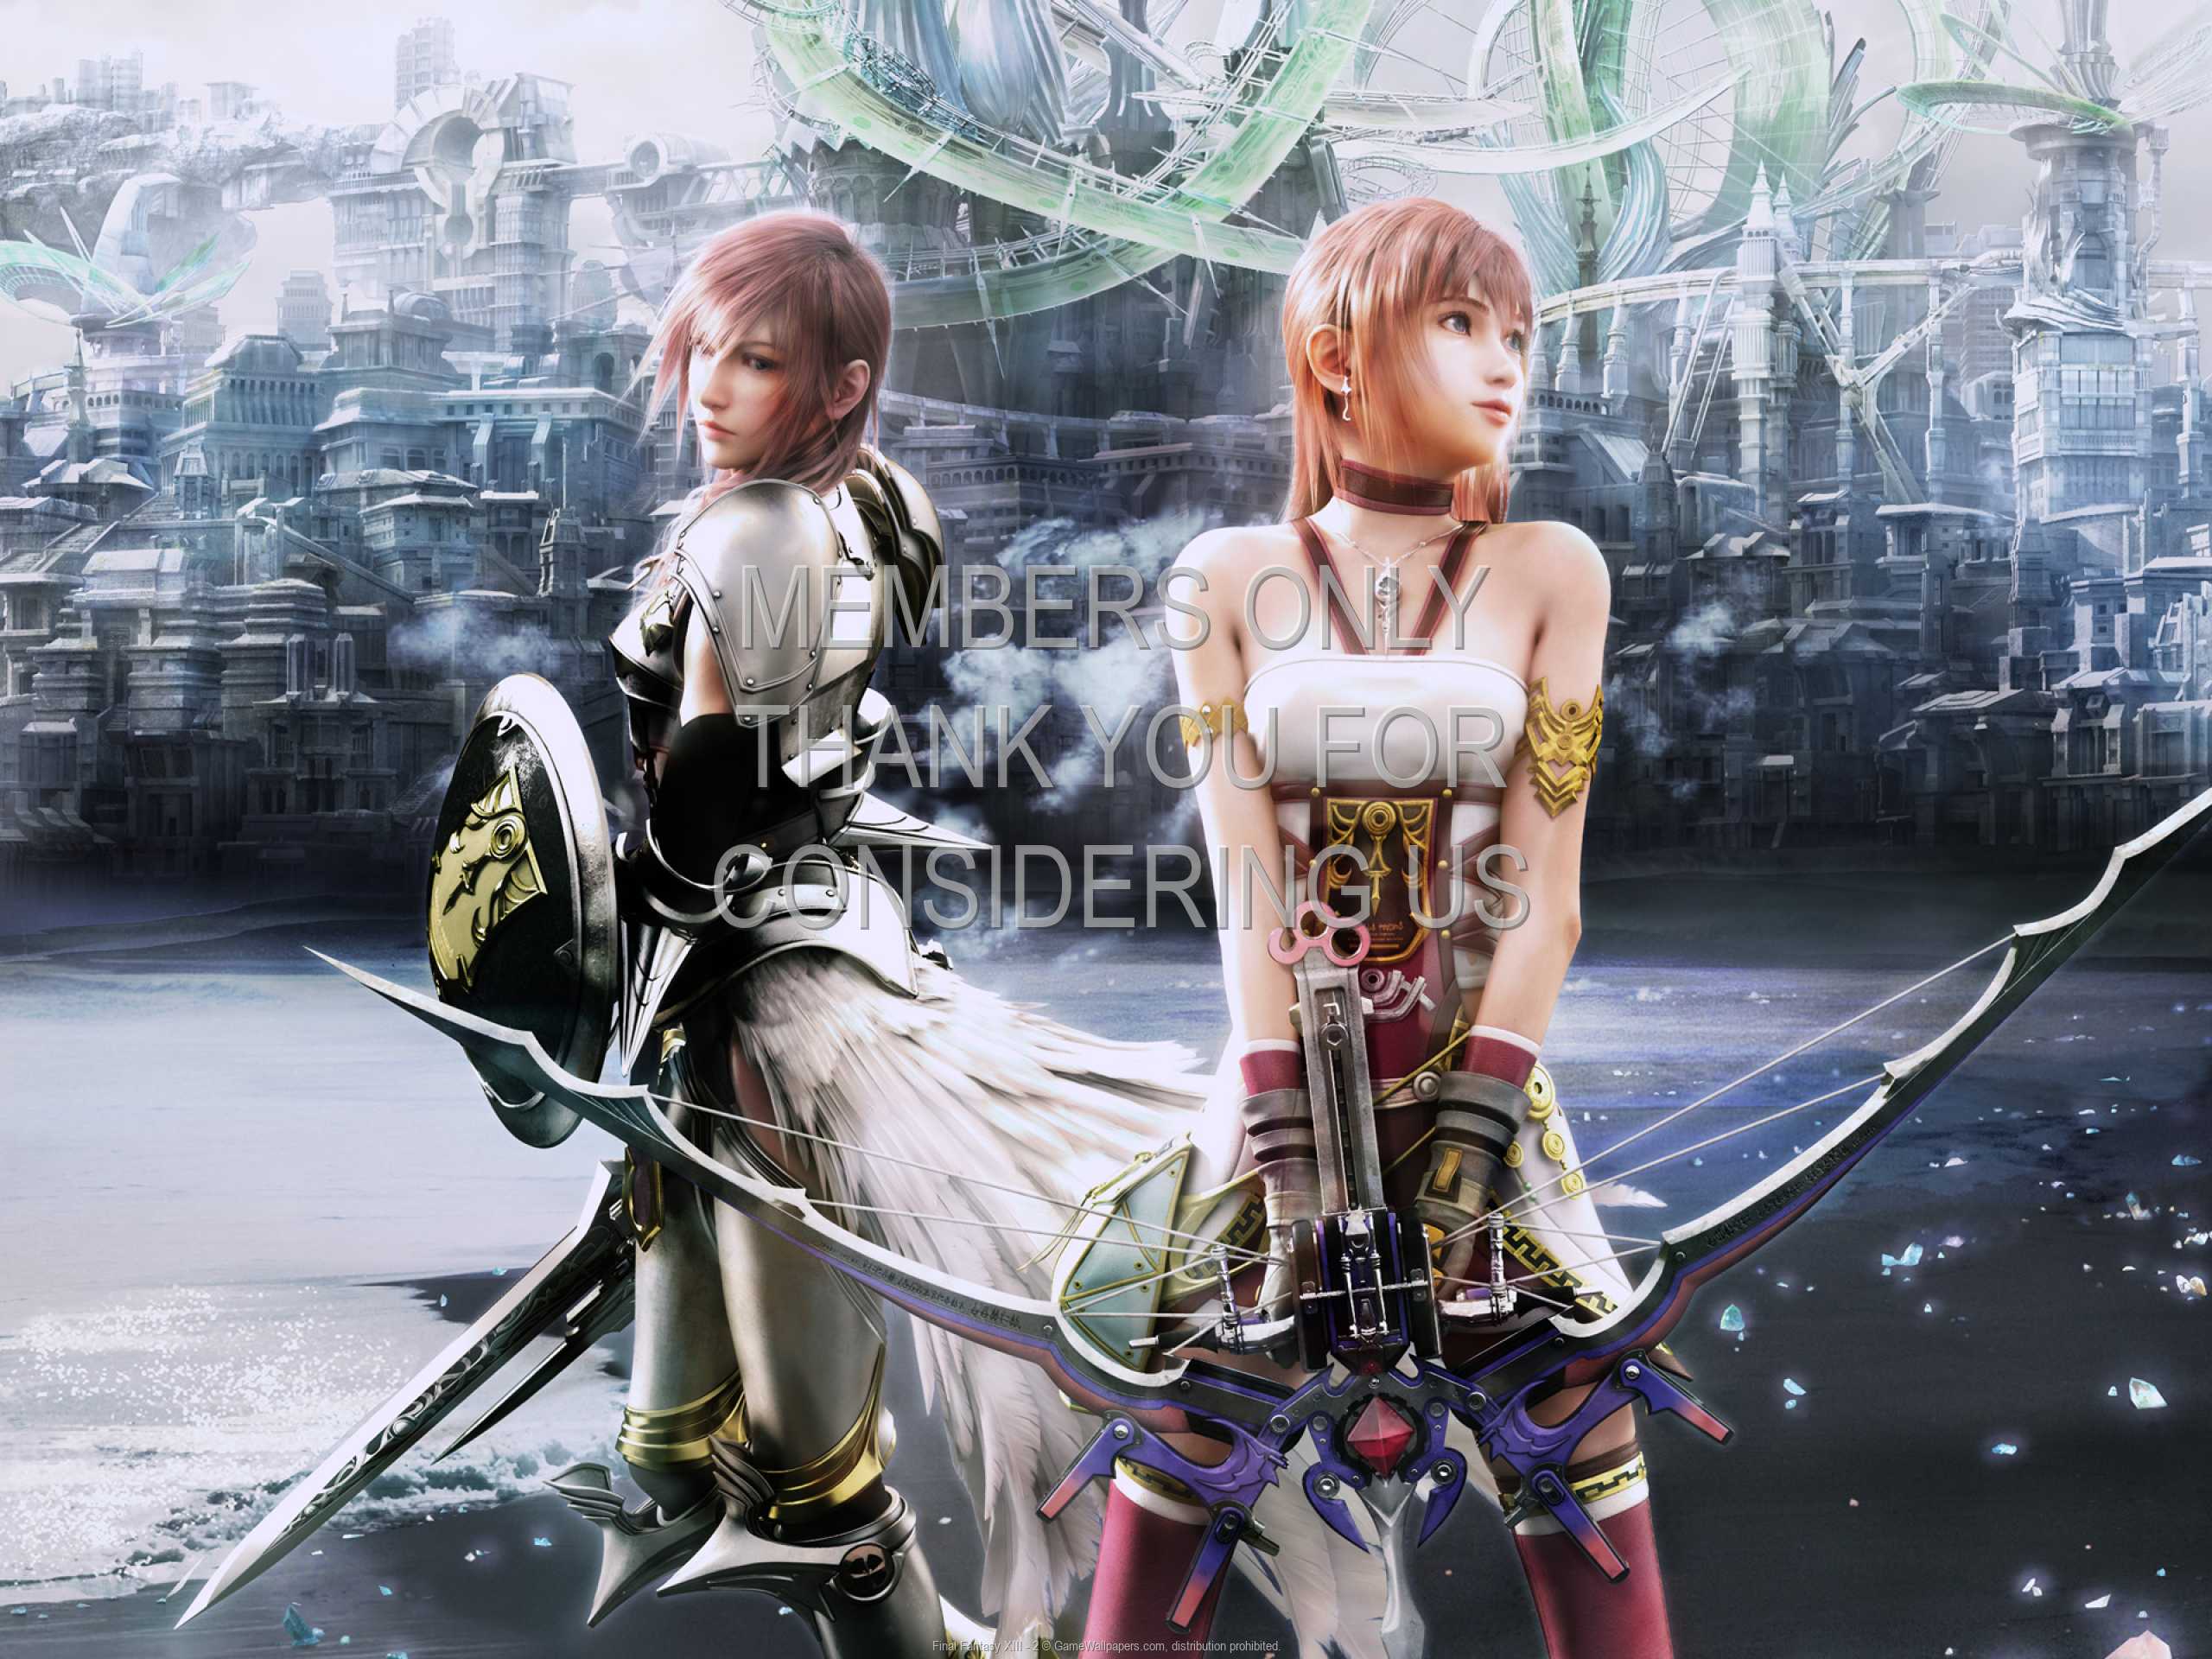 Final Fantasy XIII - 2 1080p Horizontal Mobile wallpaper or background 01